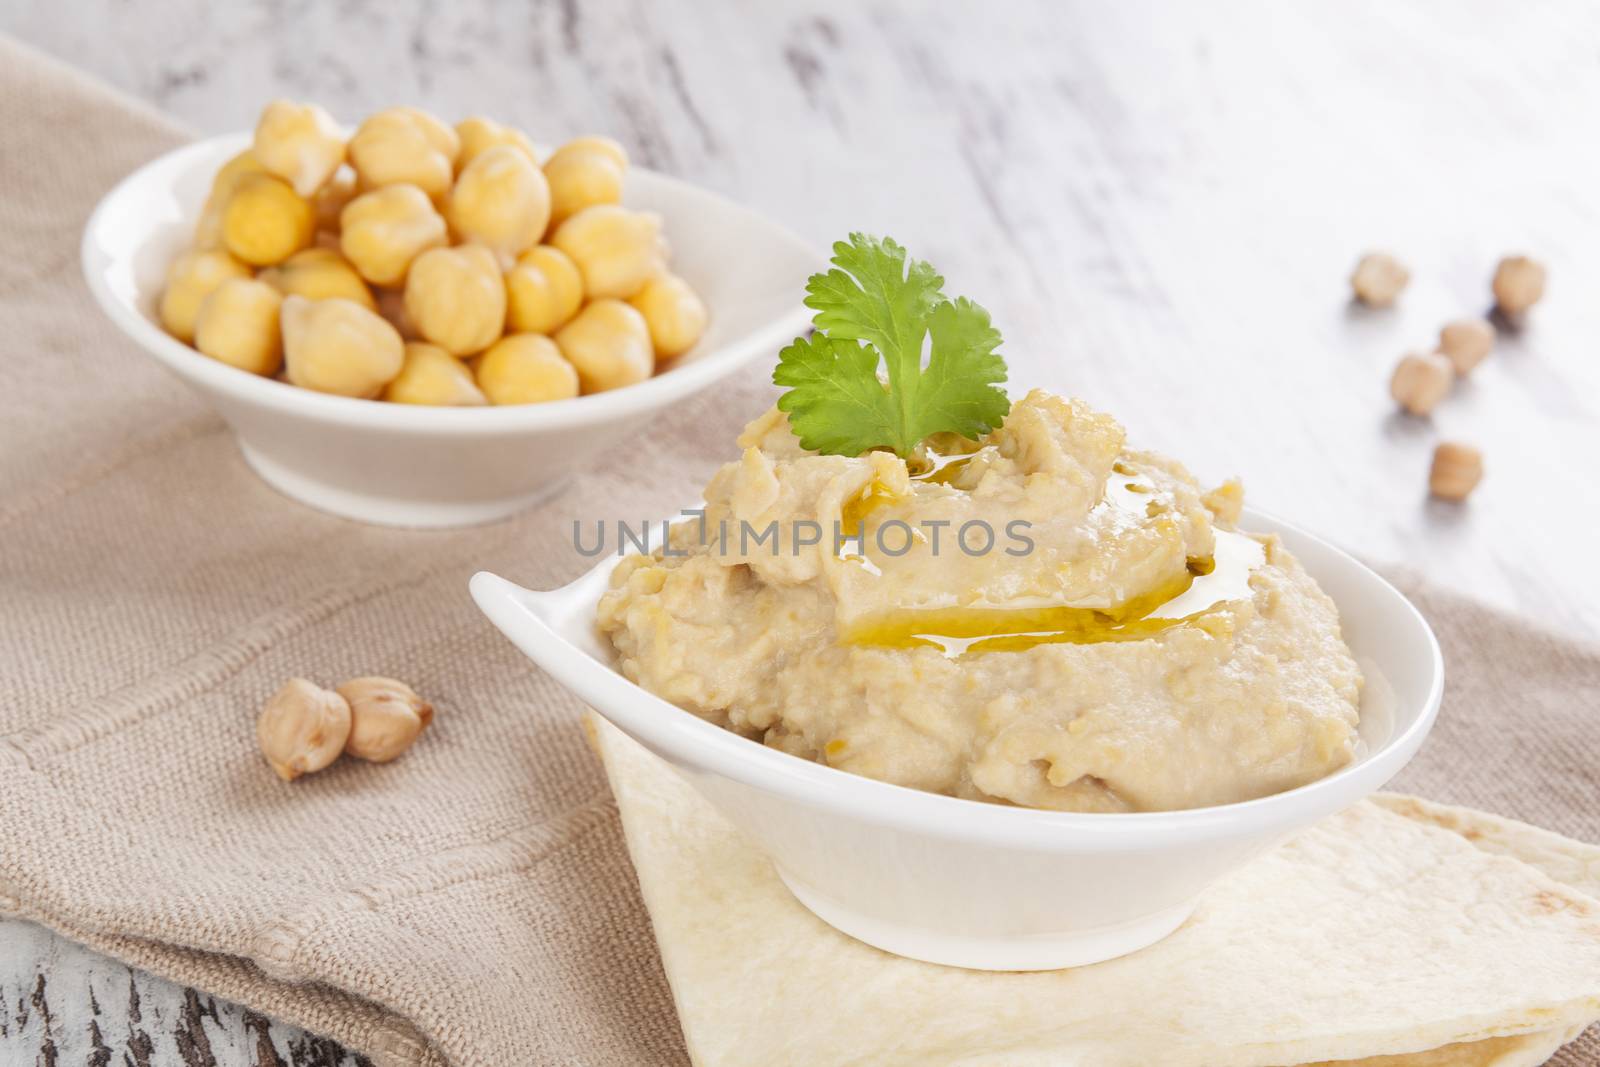 Delicious hummus and cooked chickpeas in bowl on white wooden background. Culinary hummus eating, mediterranean rustic style.